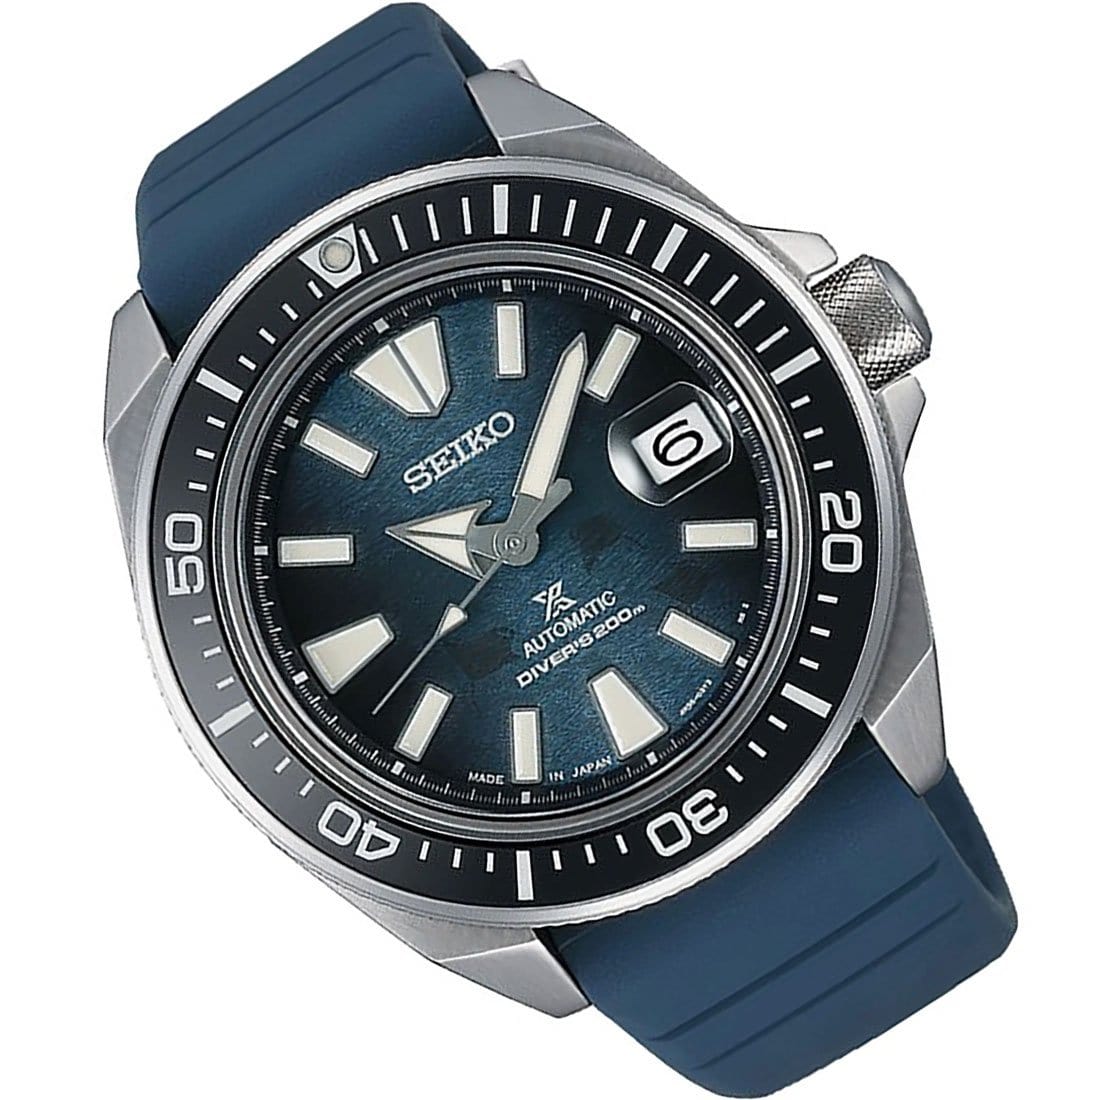 Seiko SBDY081 Prospex Manta Ray Save the Ocean Special Edition JDM Watch